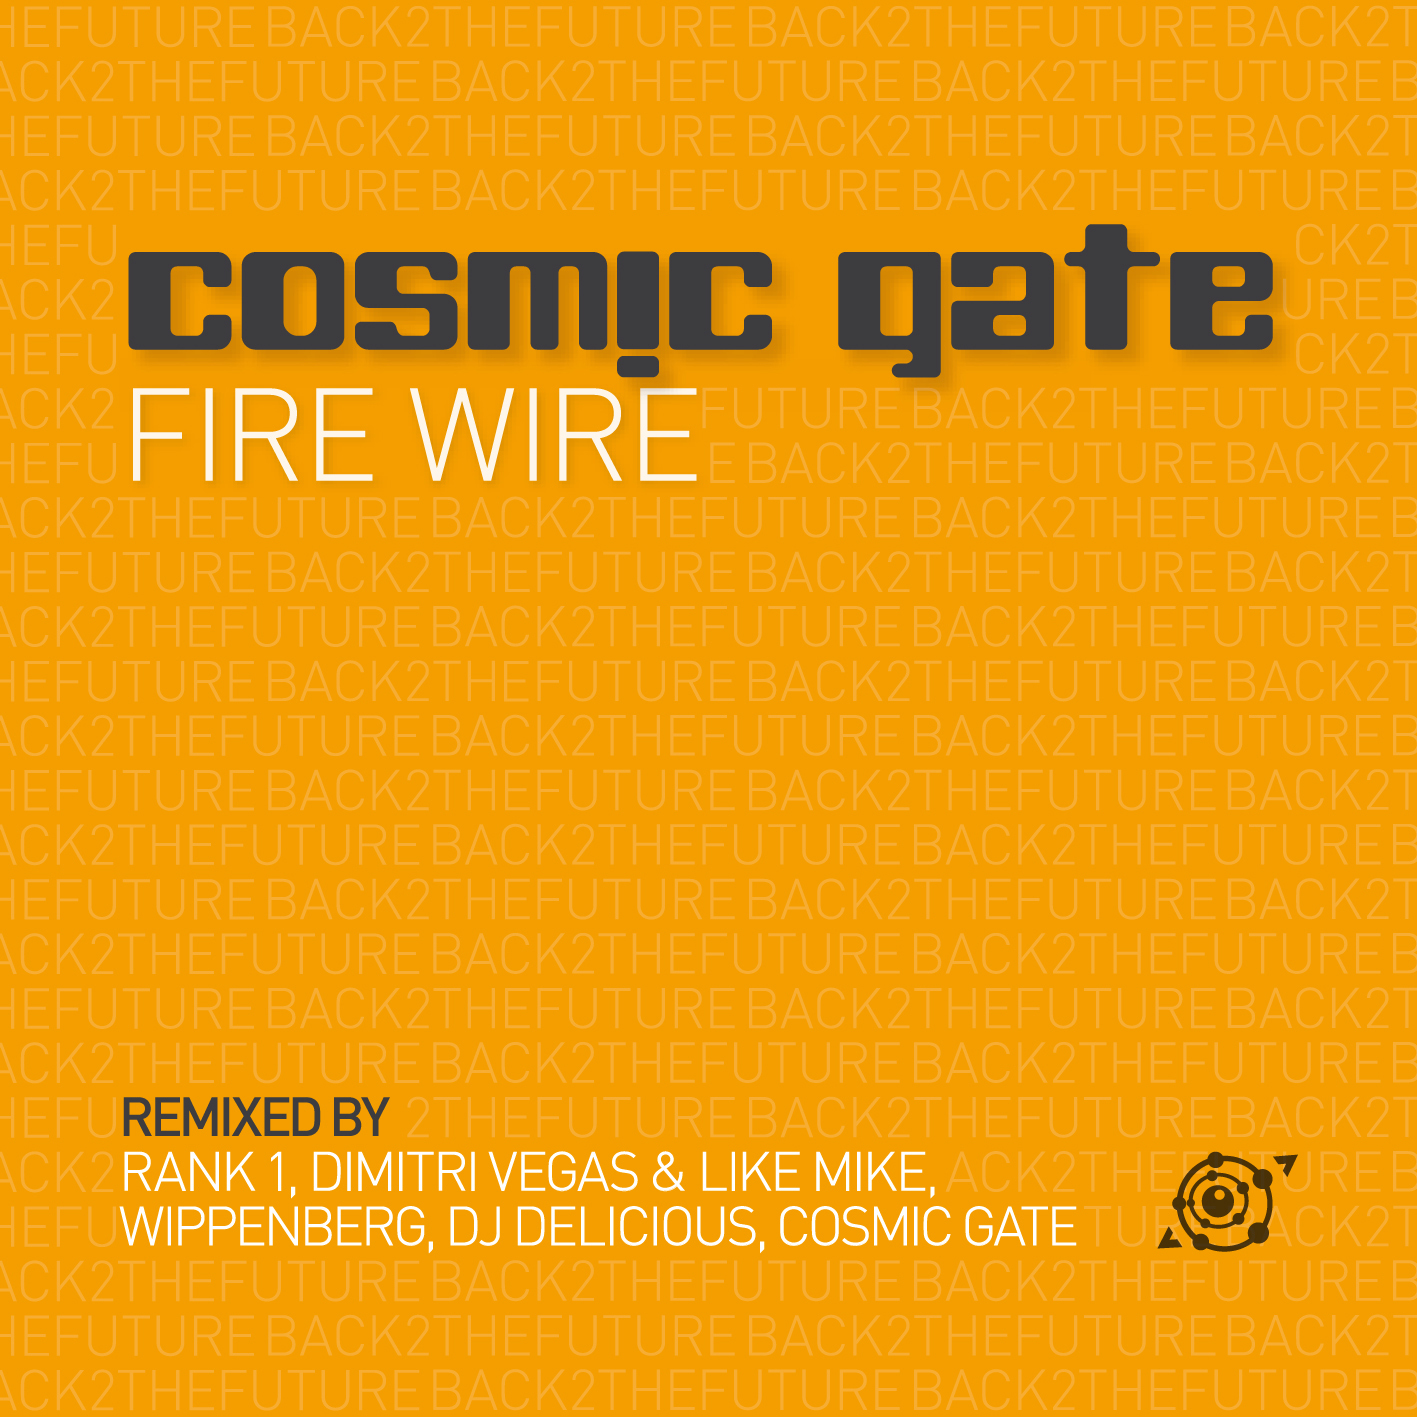 Fire Wire (Wippenberg Remix)